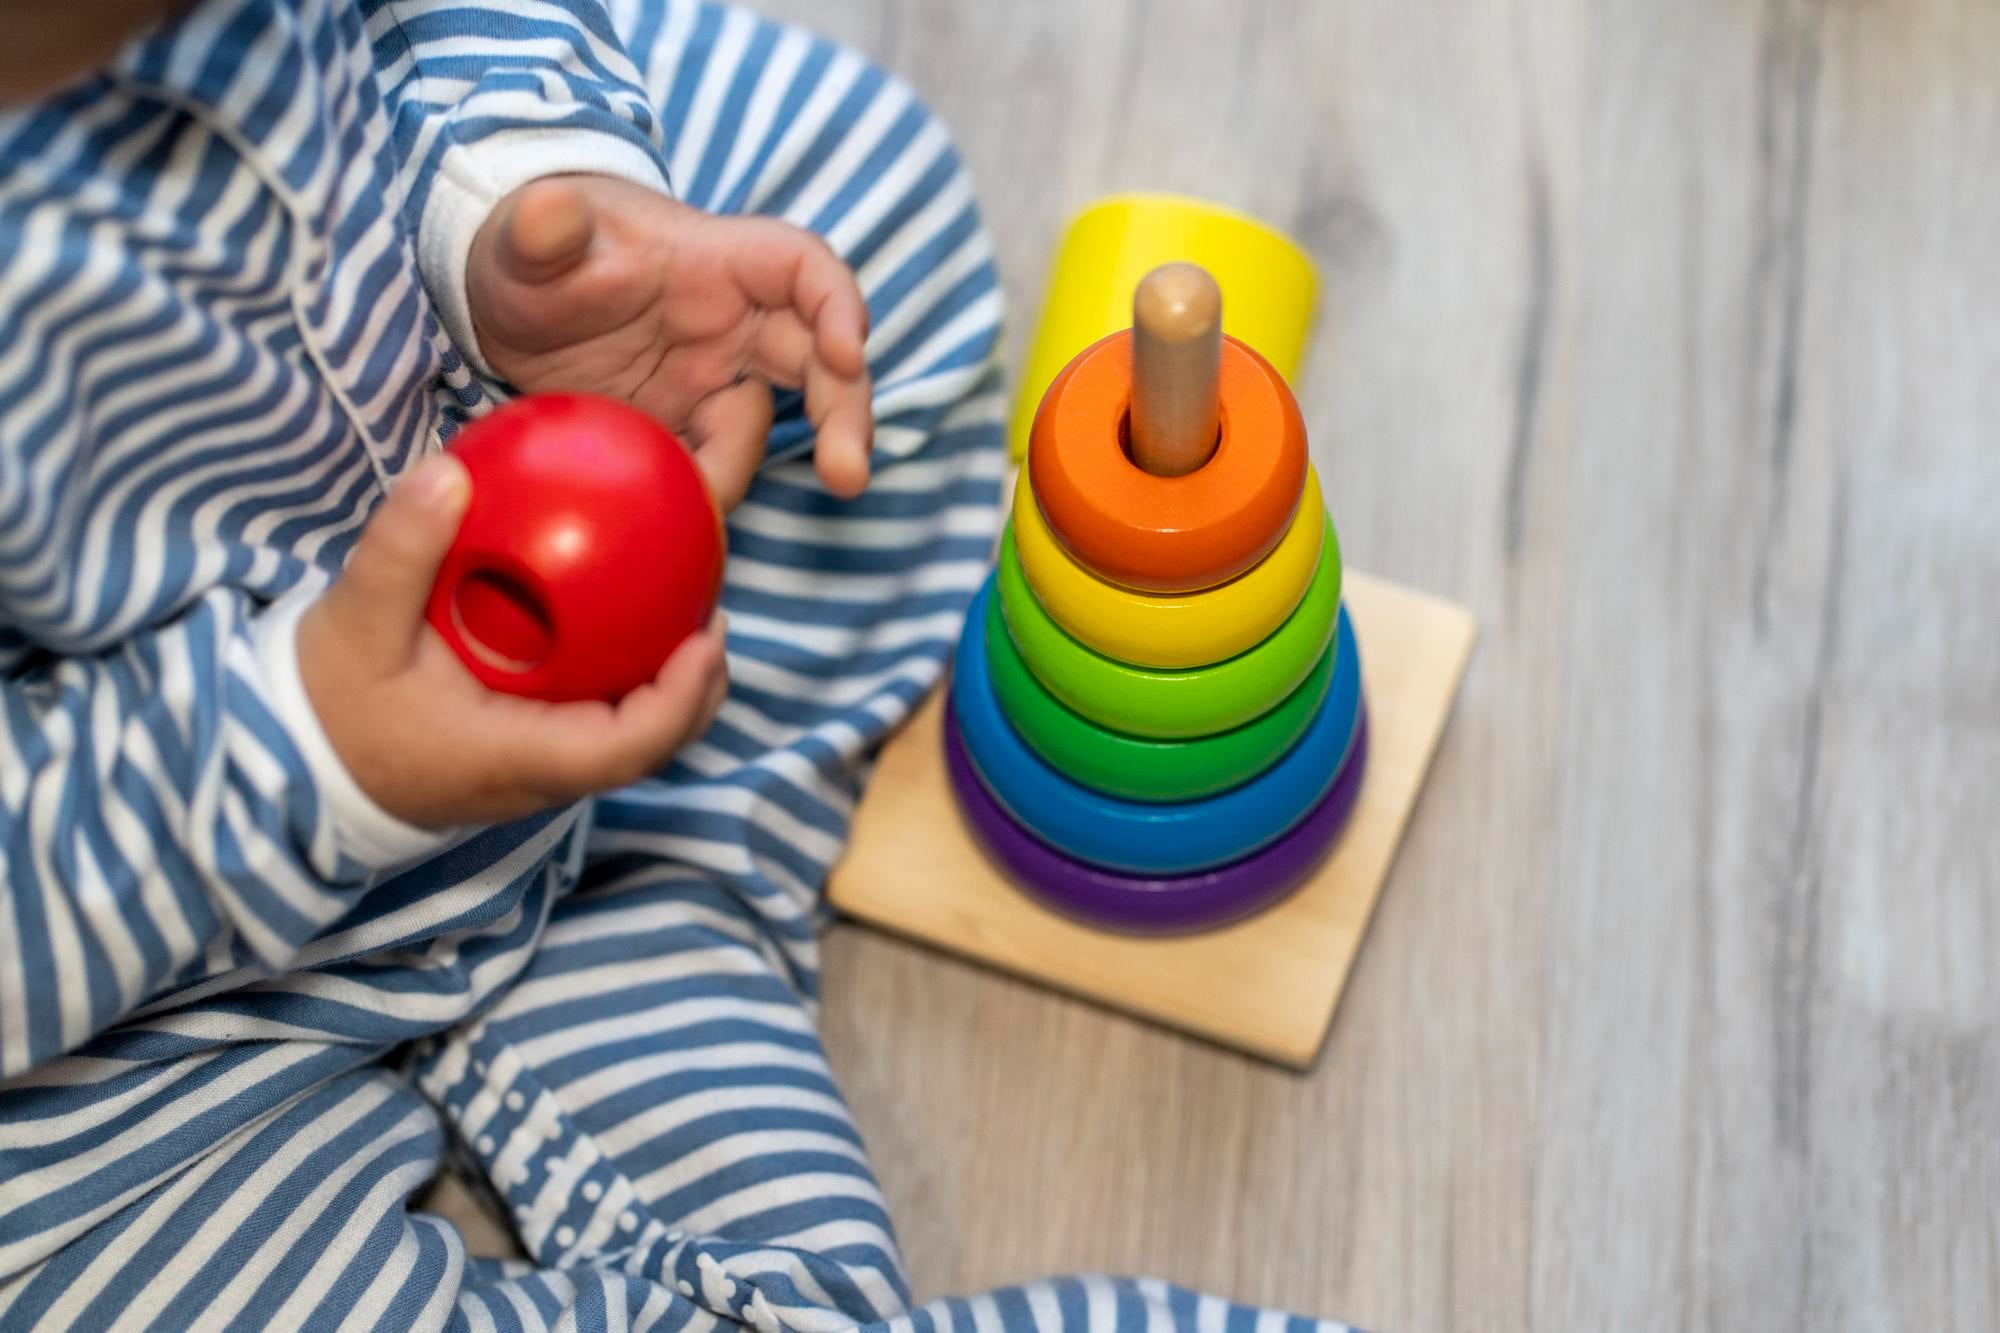 Must-Have Learning Toys for Toddlers That Will Ignite Their Imagination